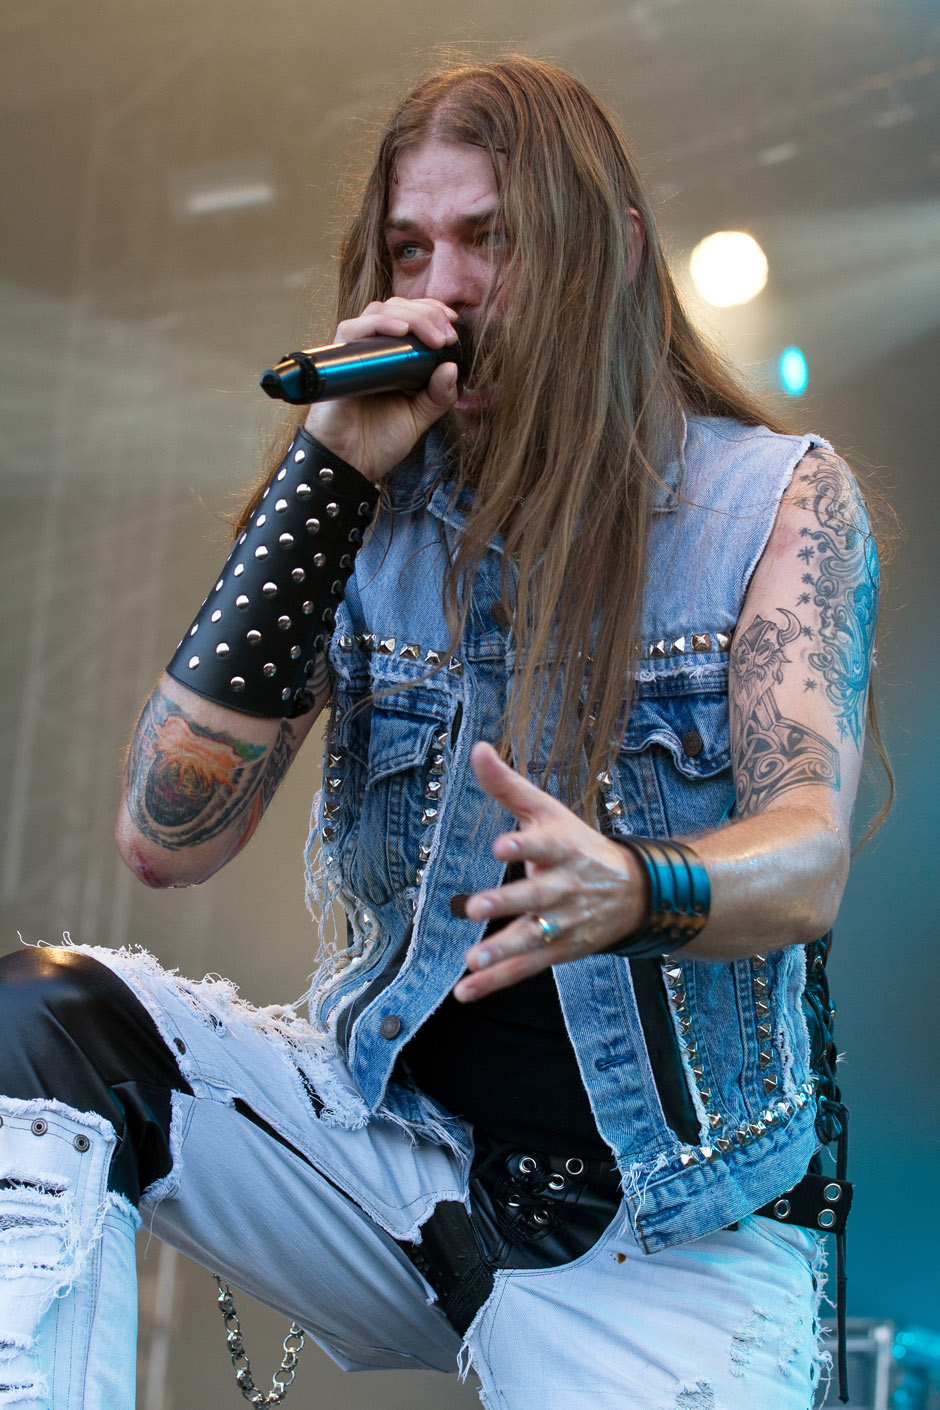 Iced Earth live, Summer Breeze 2012